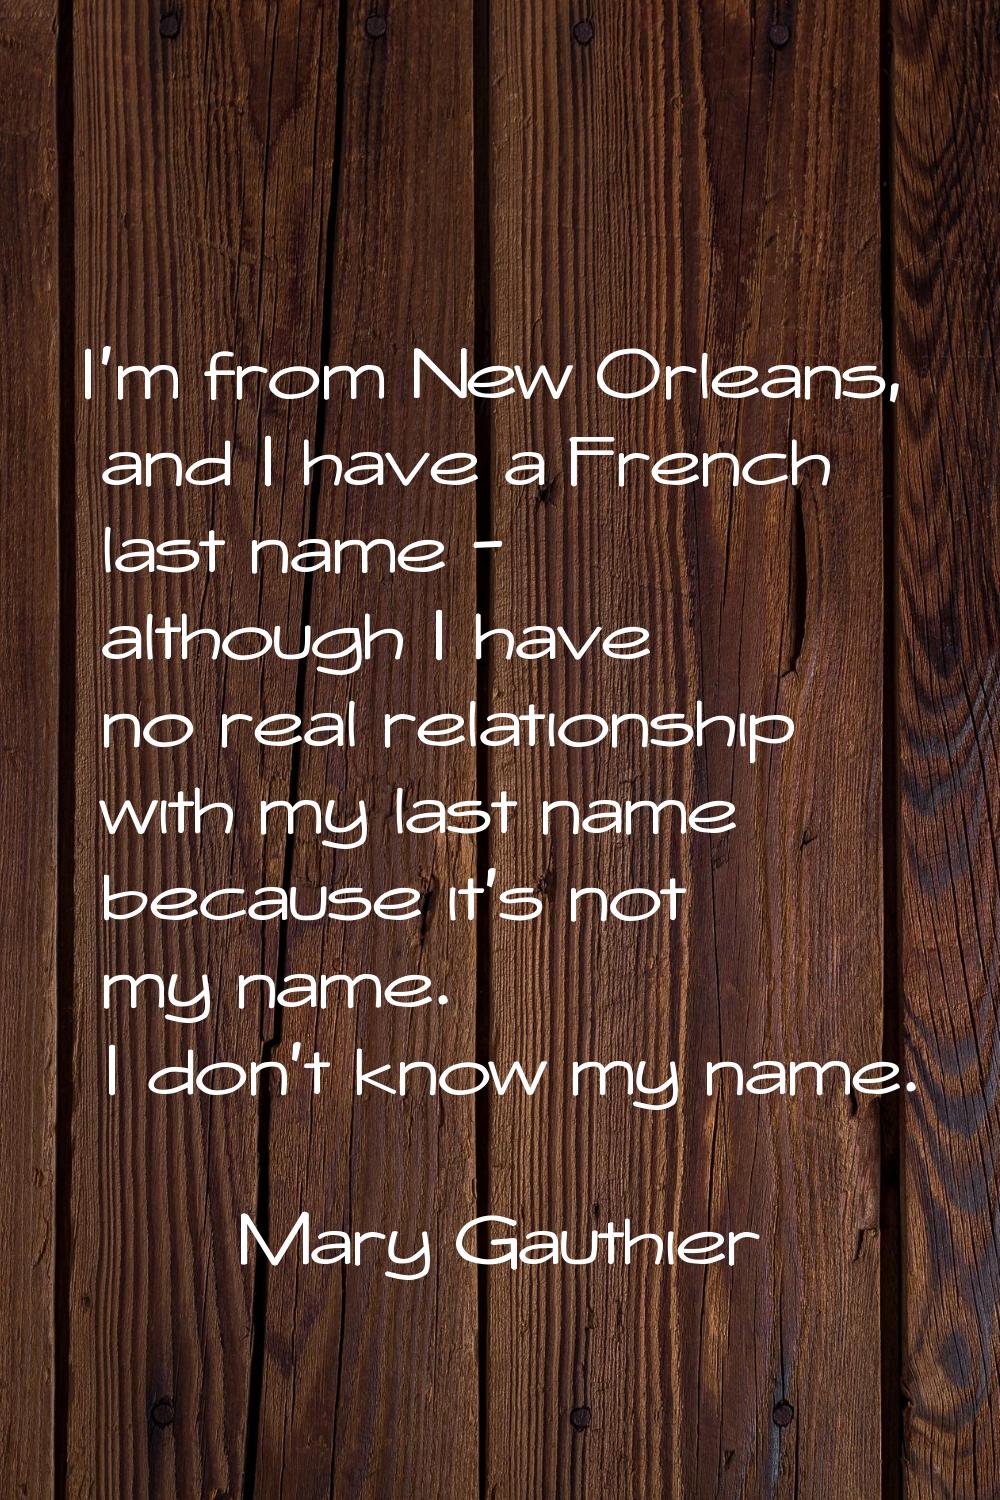 I'm from New Orleans, and I have a French last name - although I have no real relationship with my 